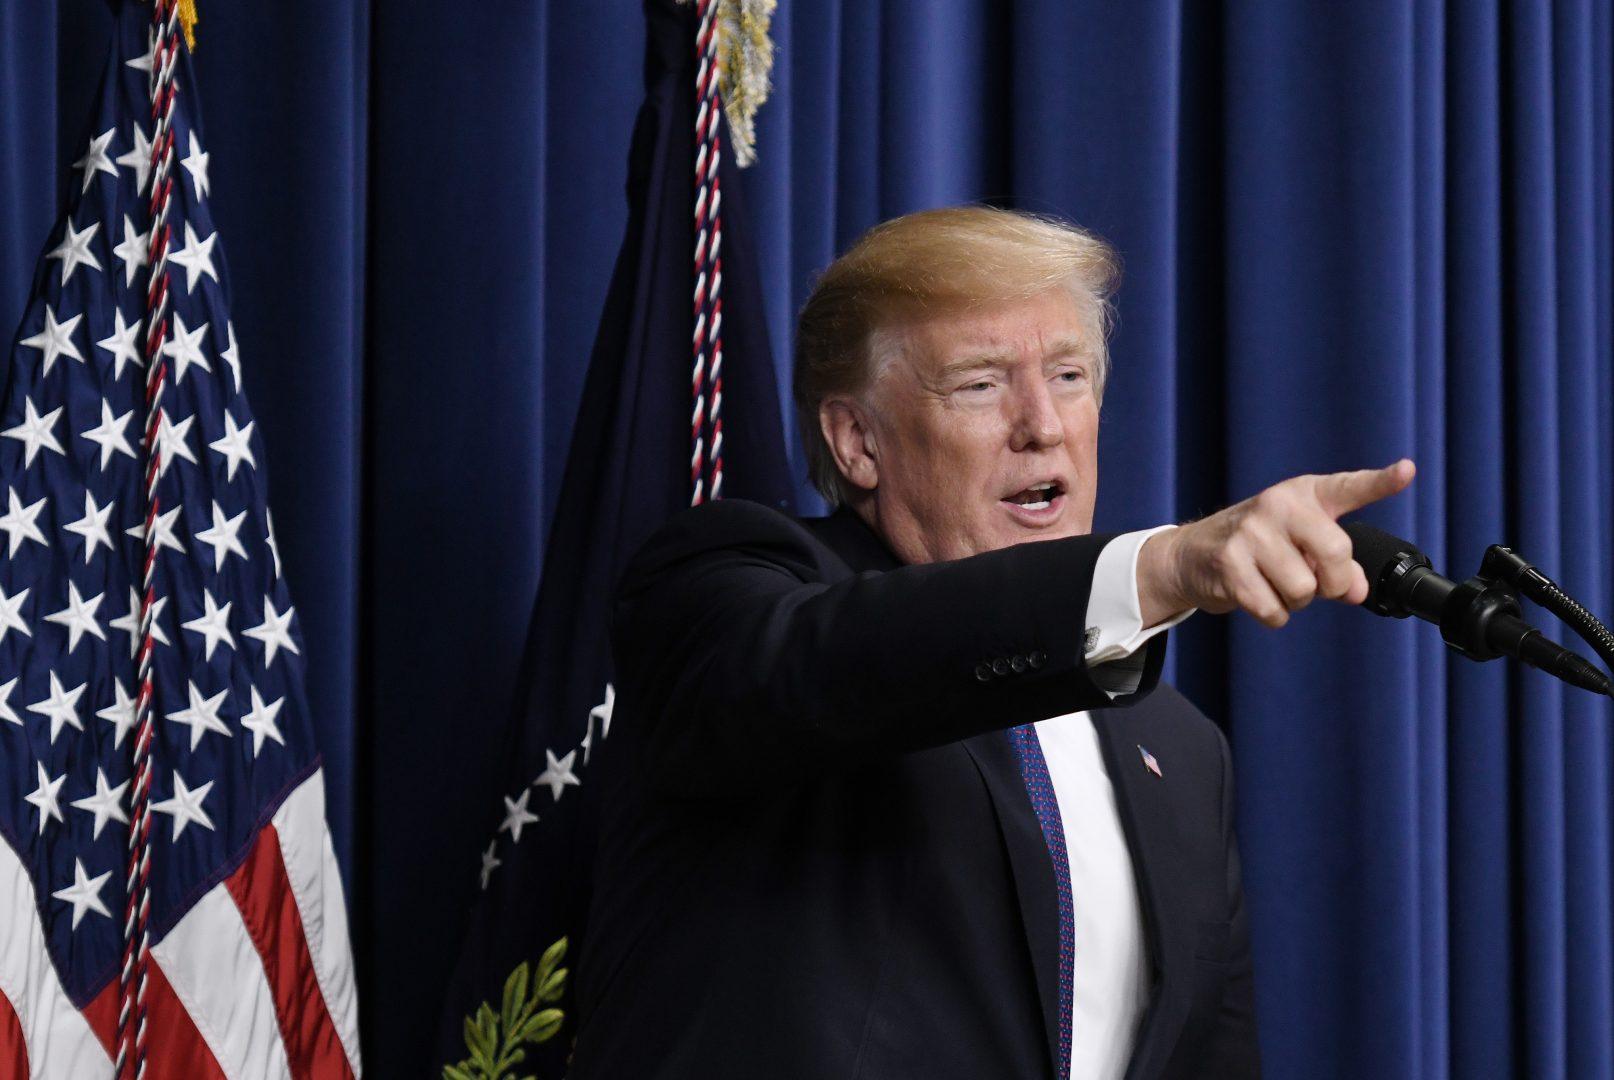 U.S. President Donald Trump speaks at the Conversations with the Women of America event in the EEOB building of the White House Jan. 16, 2018 in Washington, D.C. (Olivier Douliery/Abaca Press/TNS)